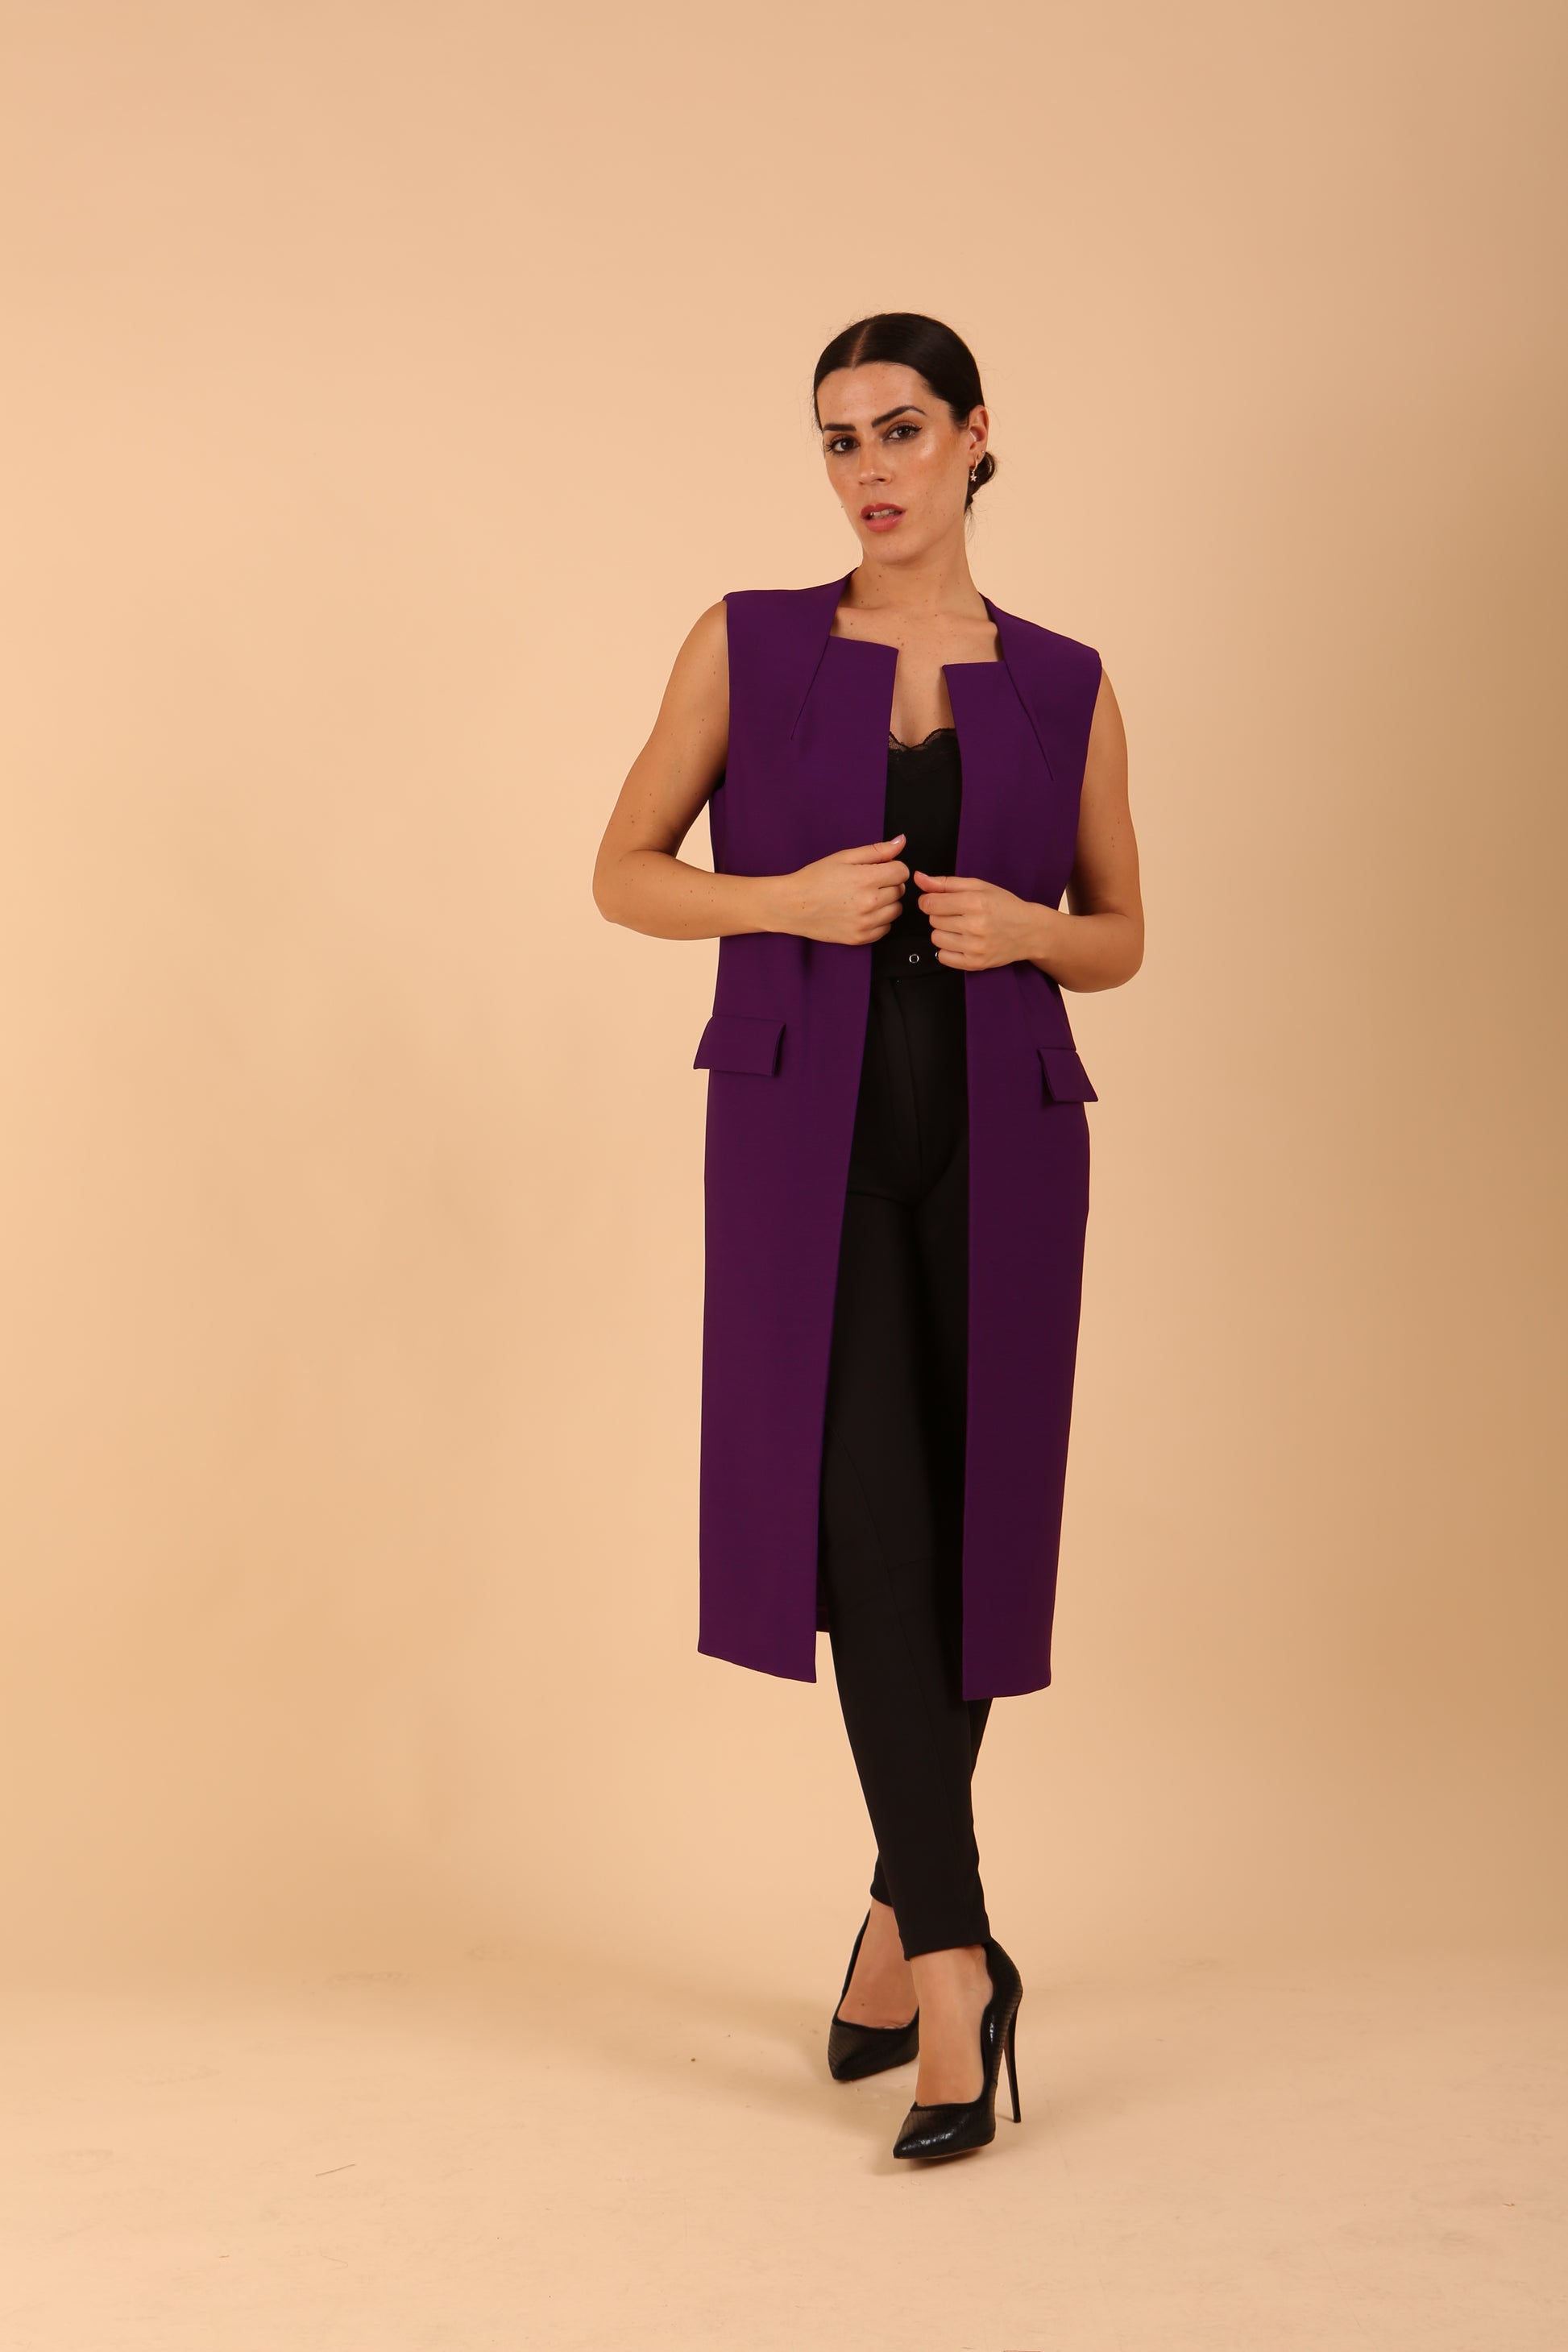 model wearing a divacatwalk Seed Harvard Sleeveless Coat midi length in imperial purple colour front